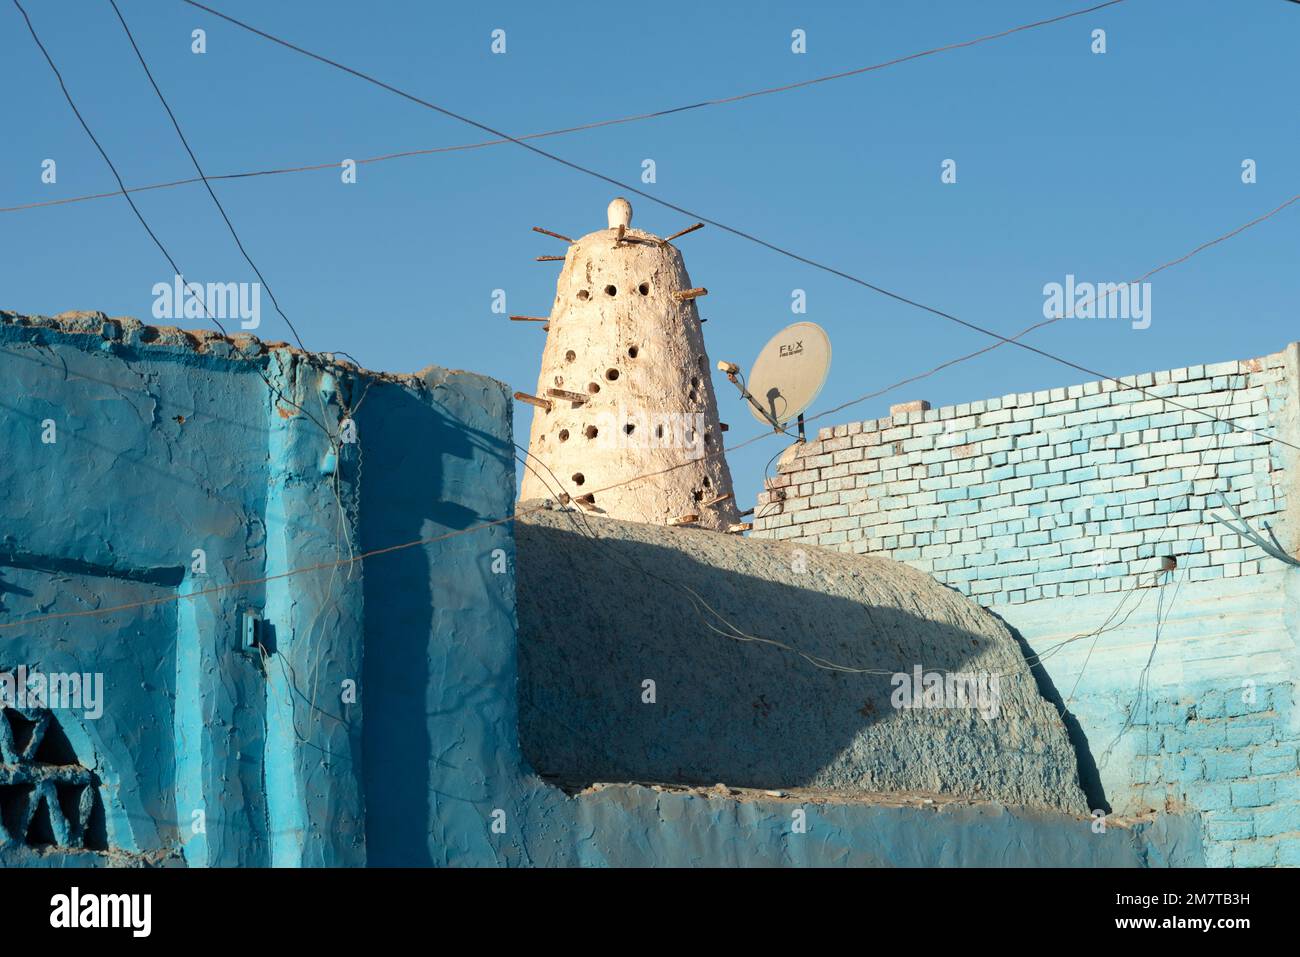 Aswan, Egypt. December 10th 2022 Blue Nubian architecture and traditional style Dovecote or mud brick Pigeon House used to raise and farm pigeons, pop Stock Photo